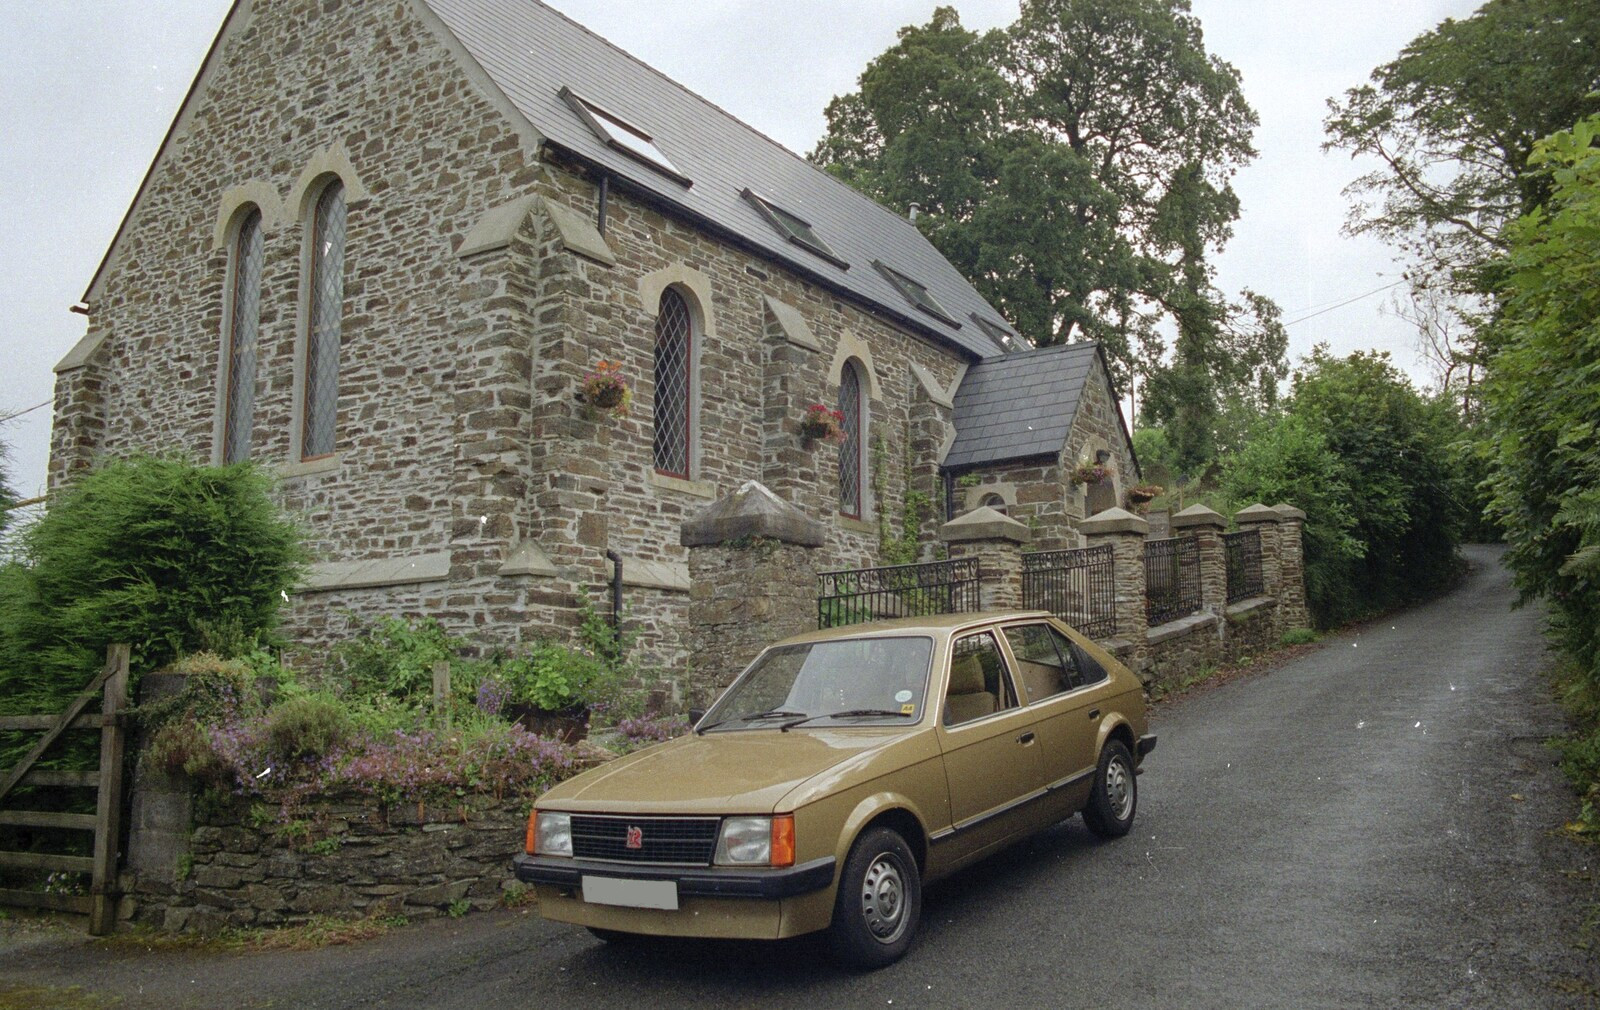 Nosher's beloved Mark 1 Astra outside The Chapel from Plymouth and The Chapel, Hoo Meavy, Devon - 25th July 1991